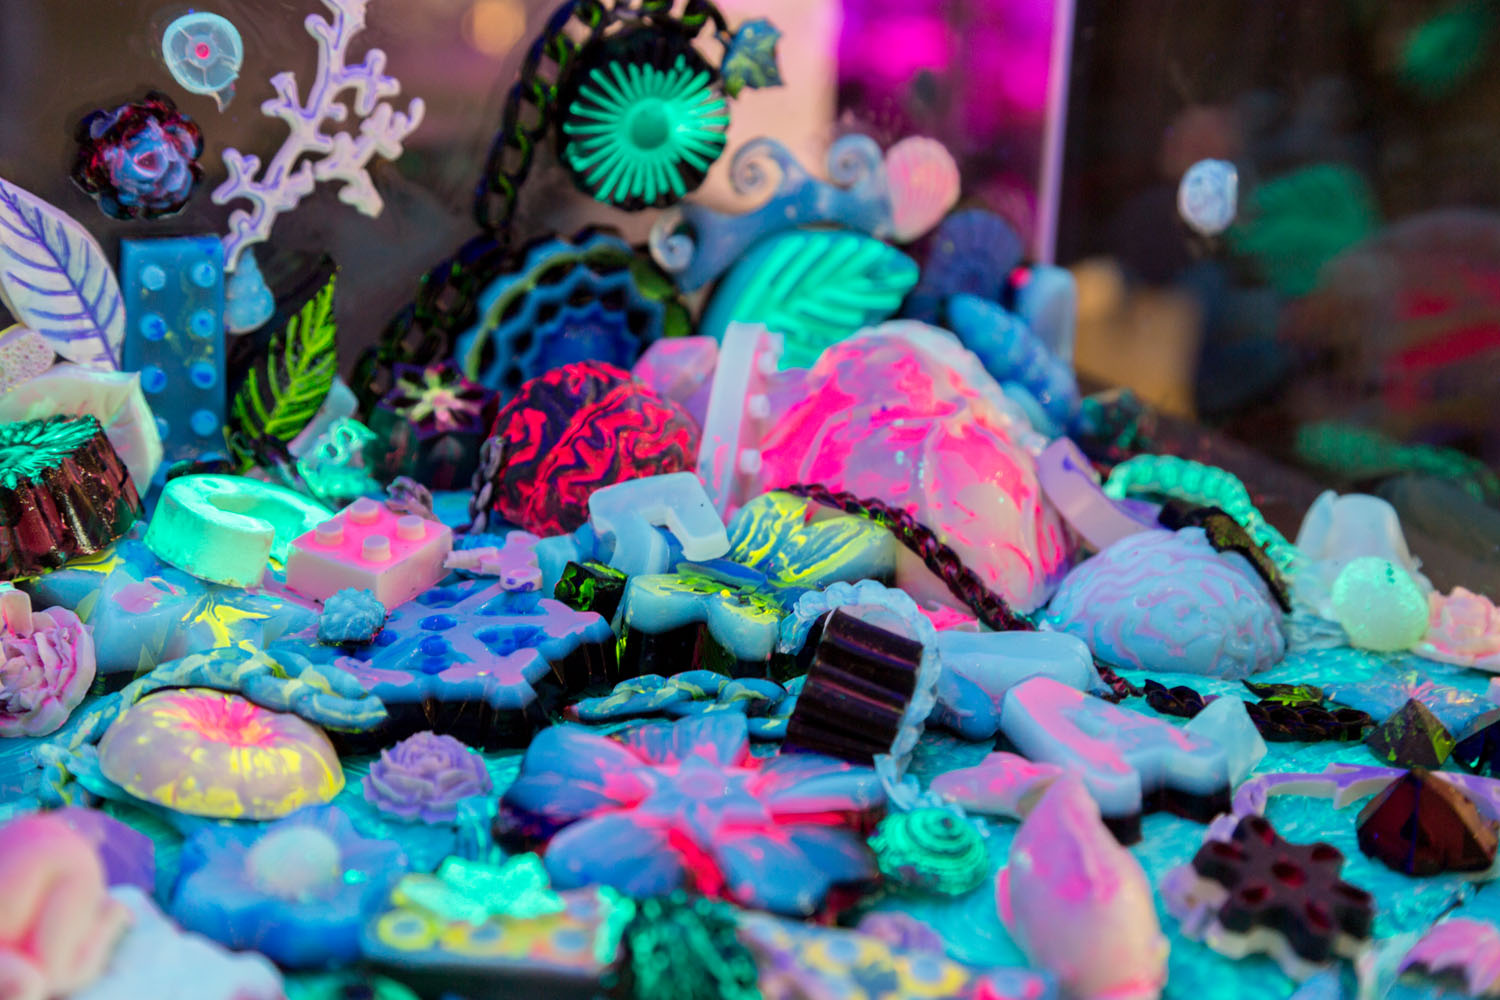 Detail shot of agar sculptures painted with fluorescent bacteria